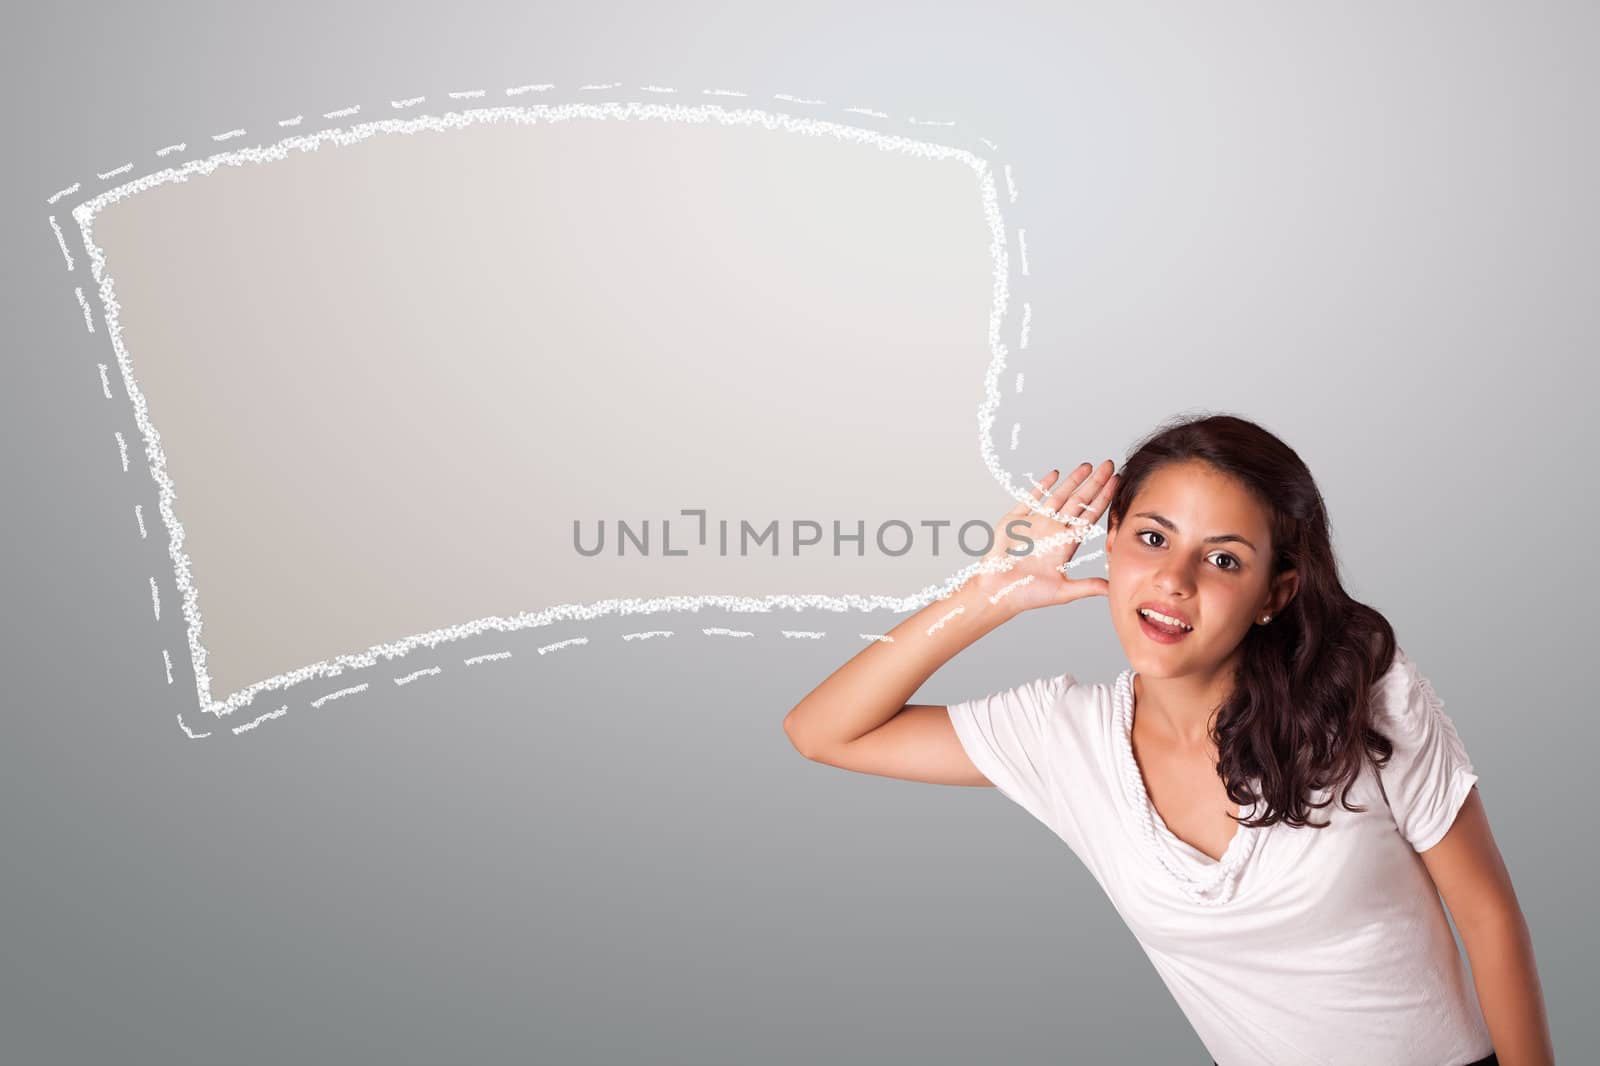 beautiful young woman gesturing with abstract speech bubble copy space